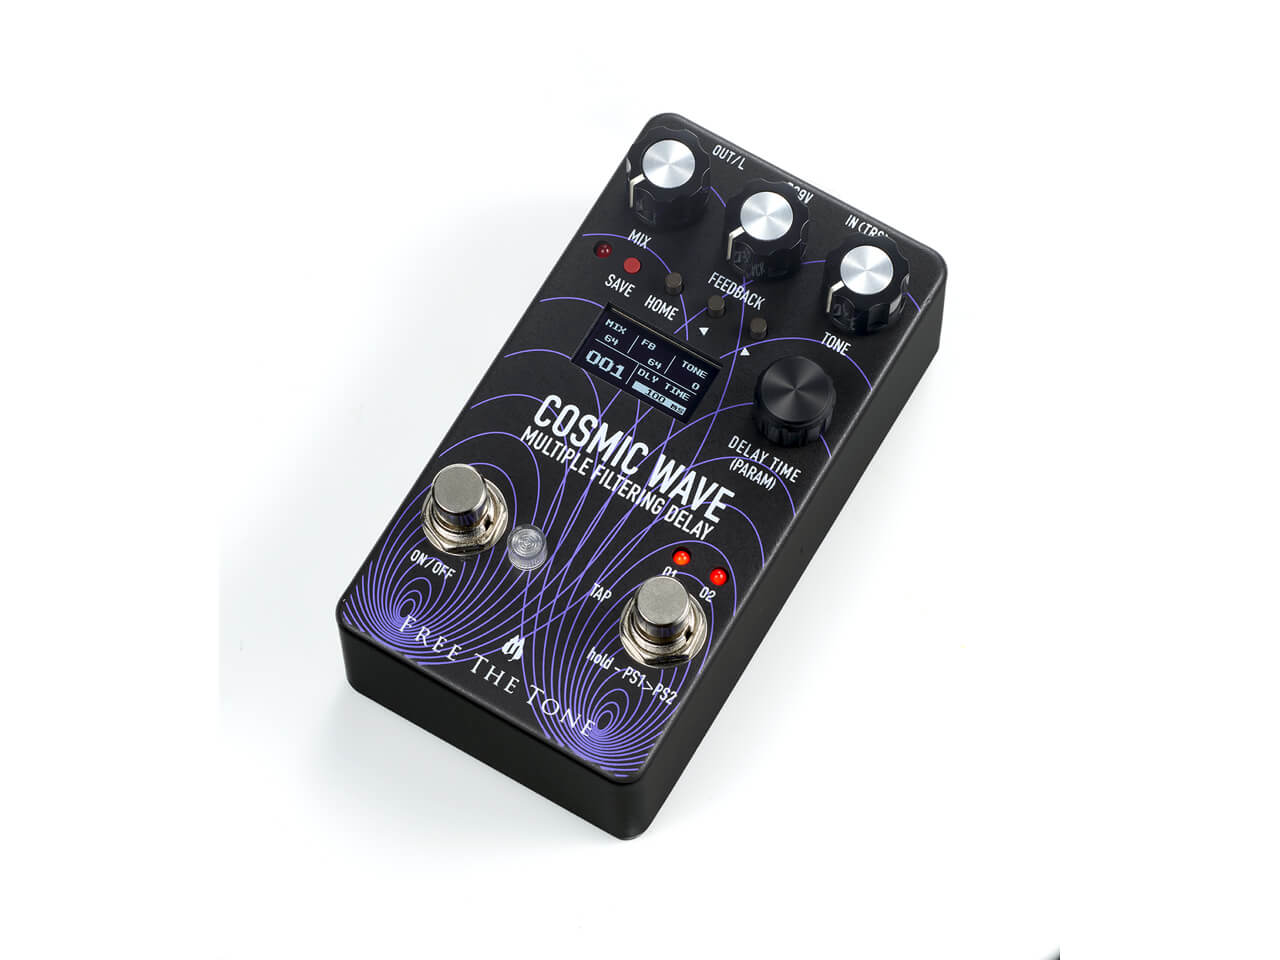 Free The Tone COSMIC WAVE / CW-1Y MULTIPLE FILTERING DELAY<br>(ディレイ)(フリーザトーン) お茶の水駅前店(東京)